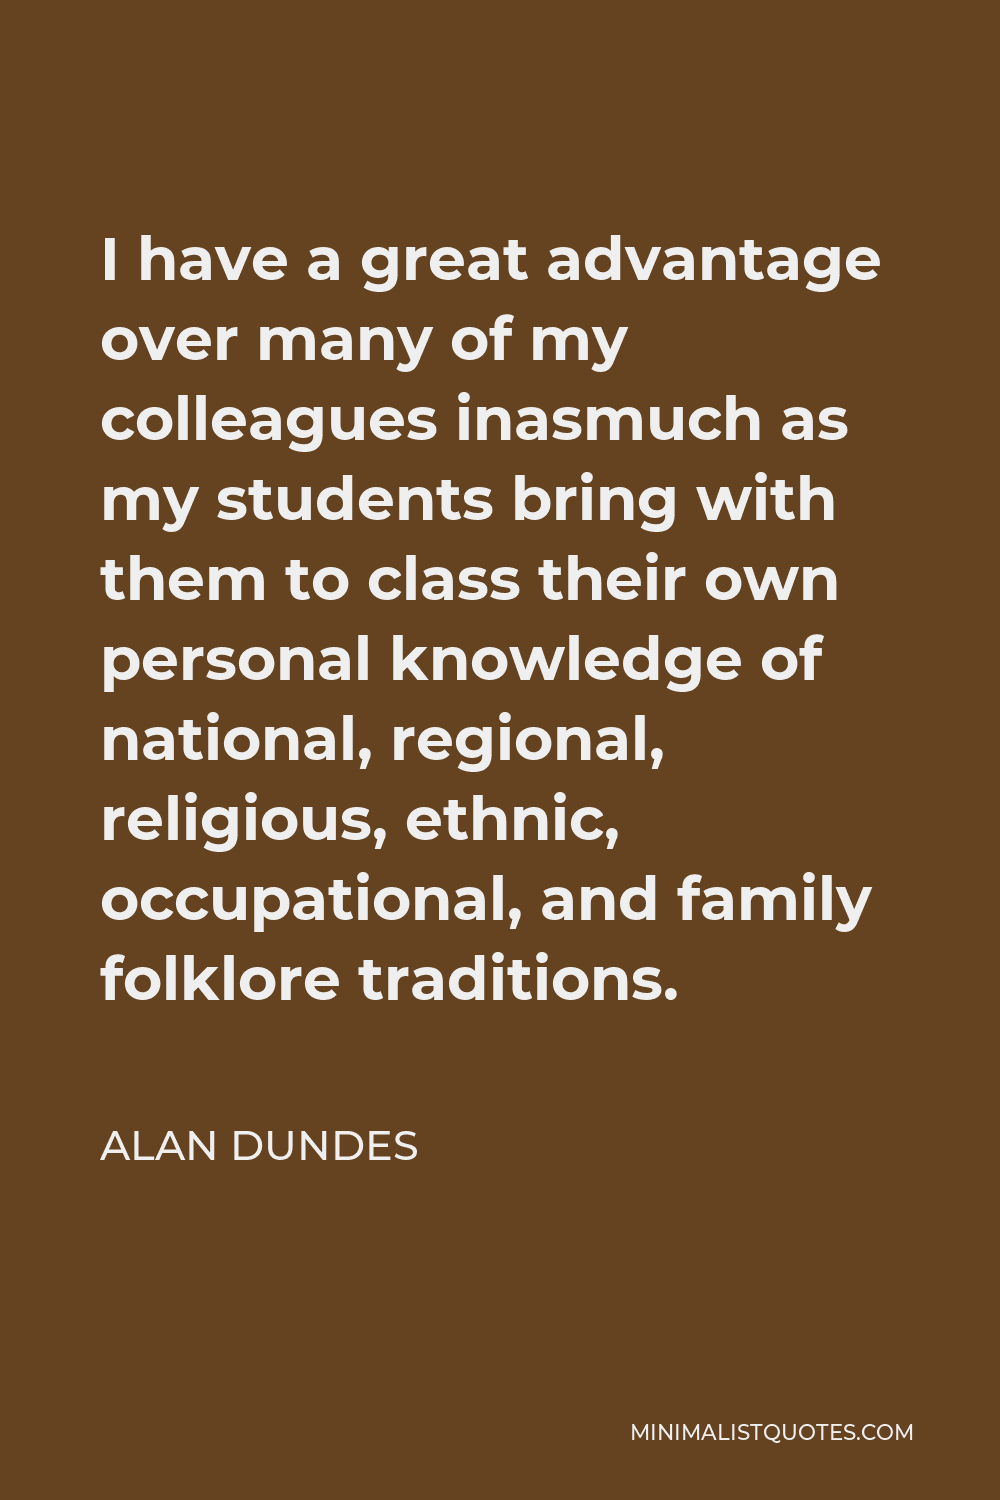 Alan Dundes Quote - I have a great advantage over many of my colleagues inasmuch as my students bring with them to class their own personal knowledge of national, regional, religious, ethnic, occupational, and family folklore traditions.